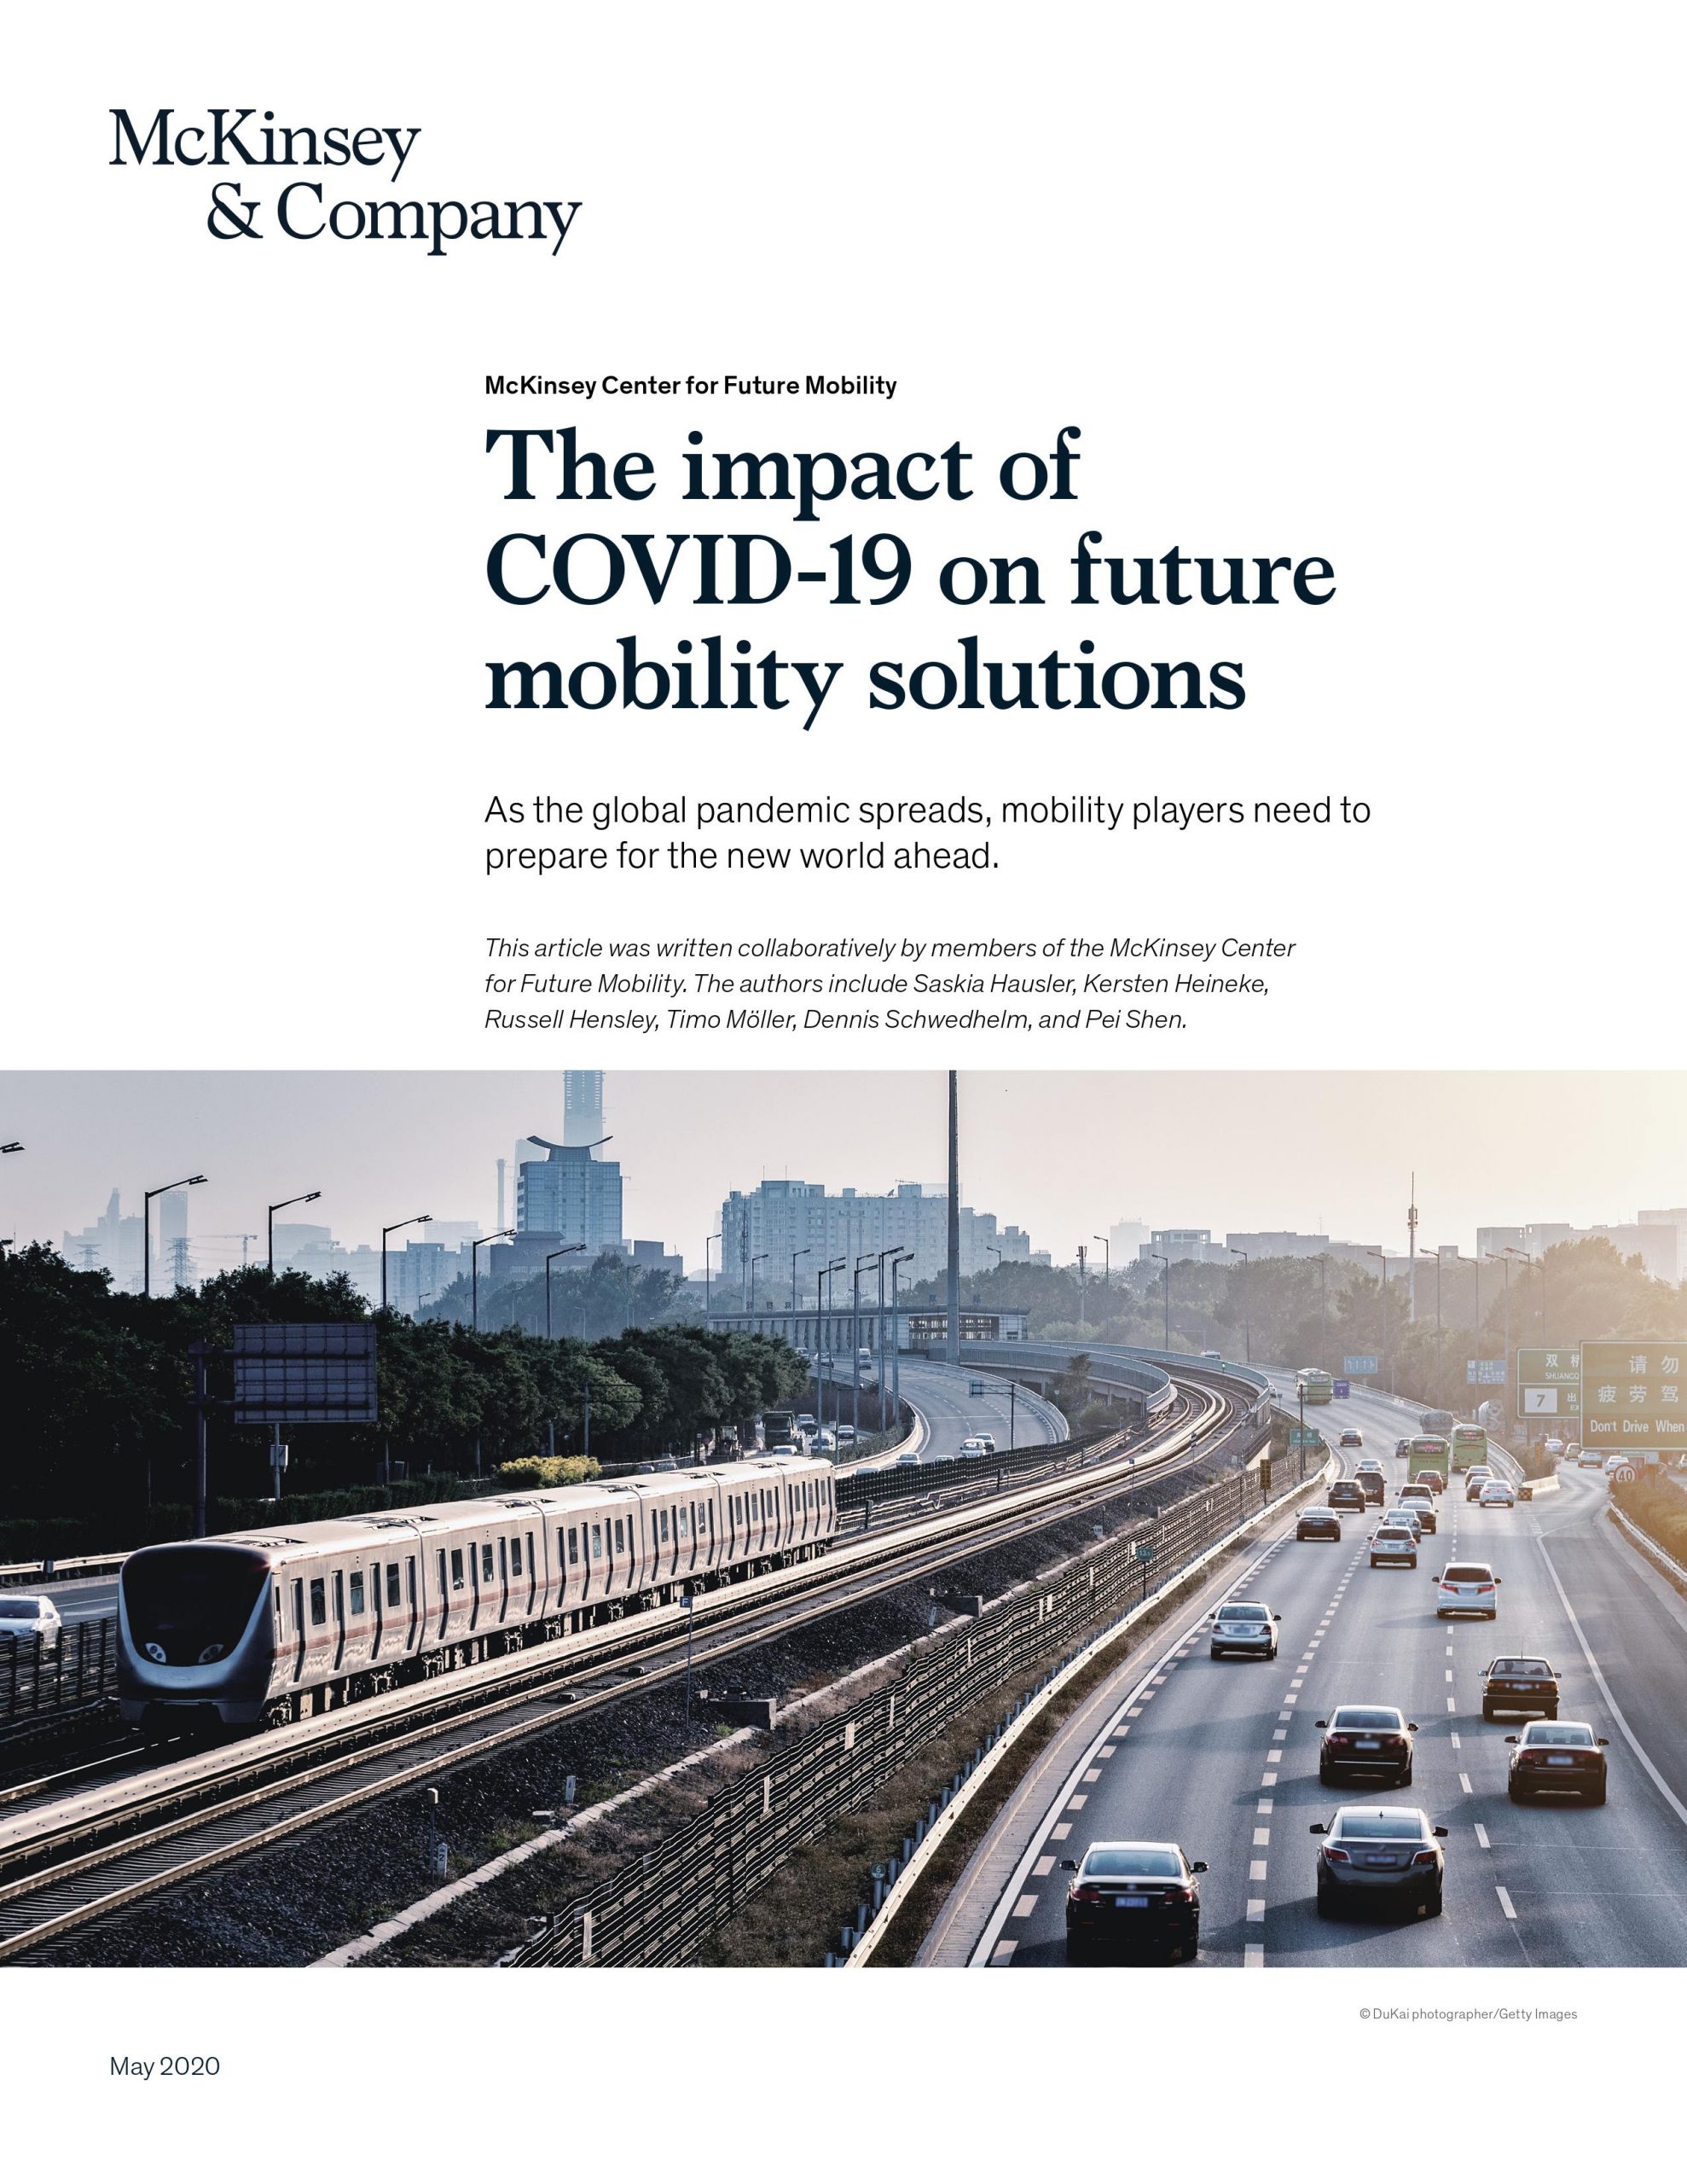 The impact of COVID-19 on future mobility solutions